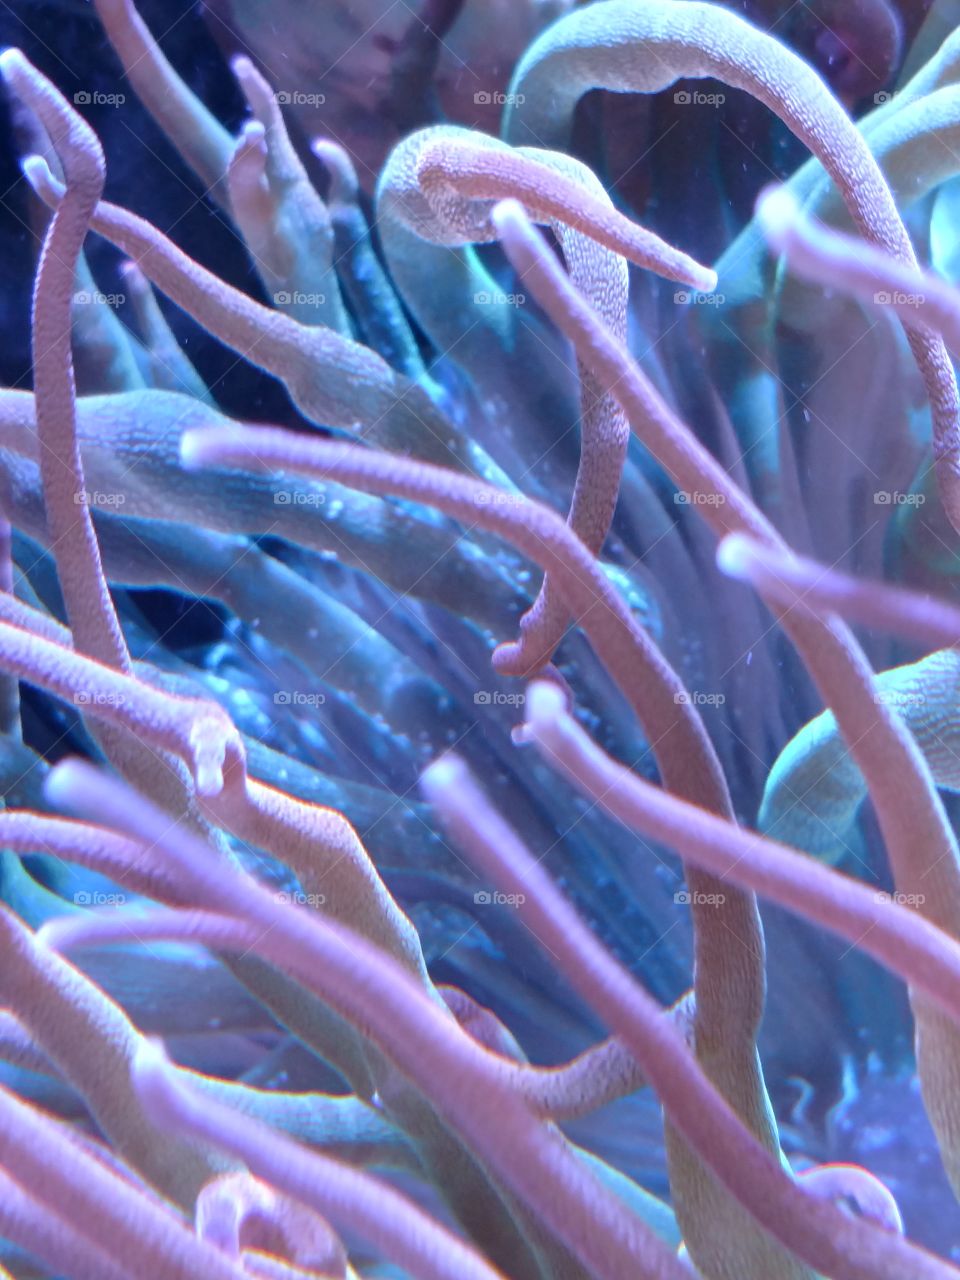 Rose bubble tip anemone